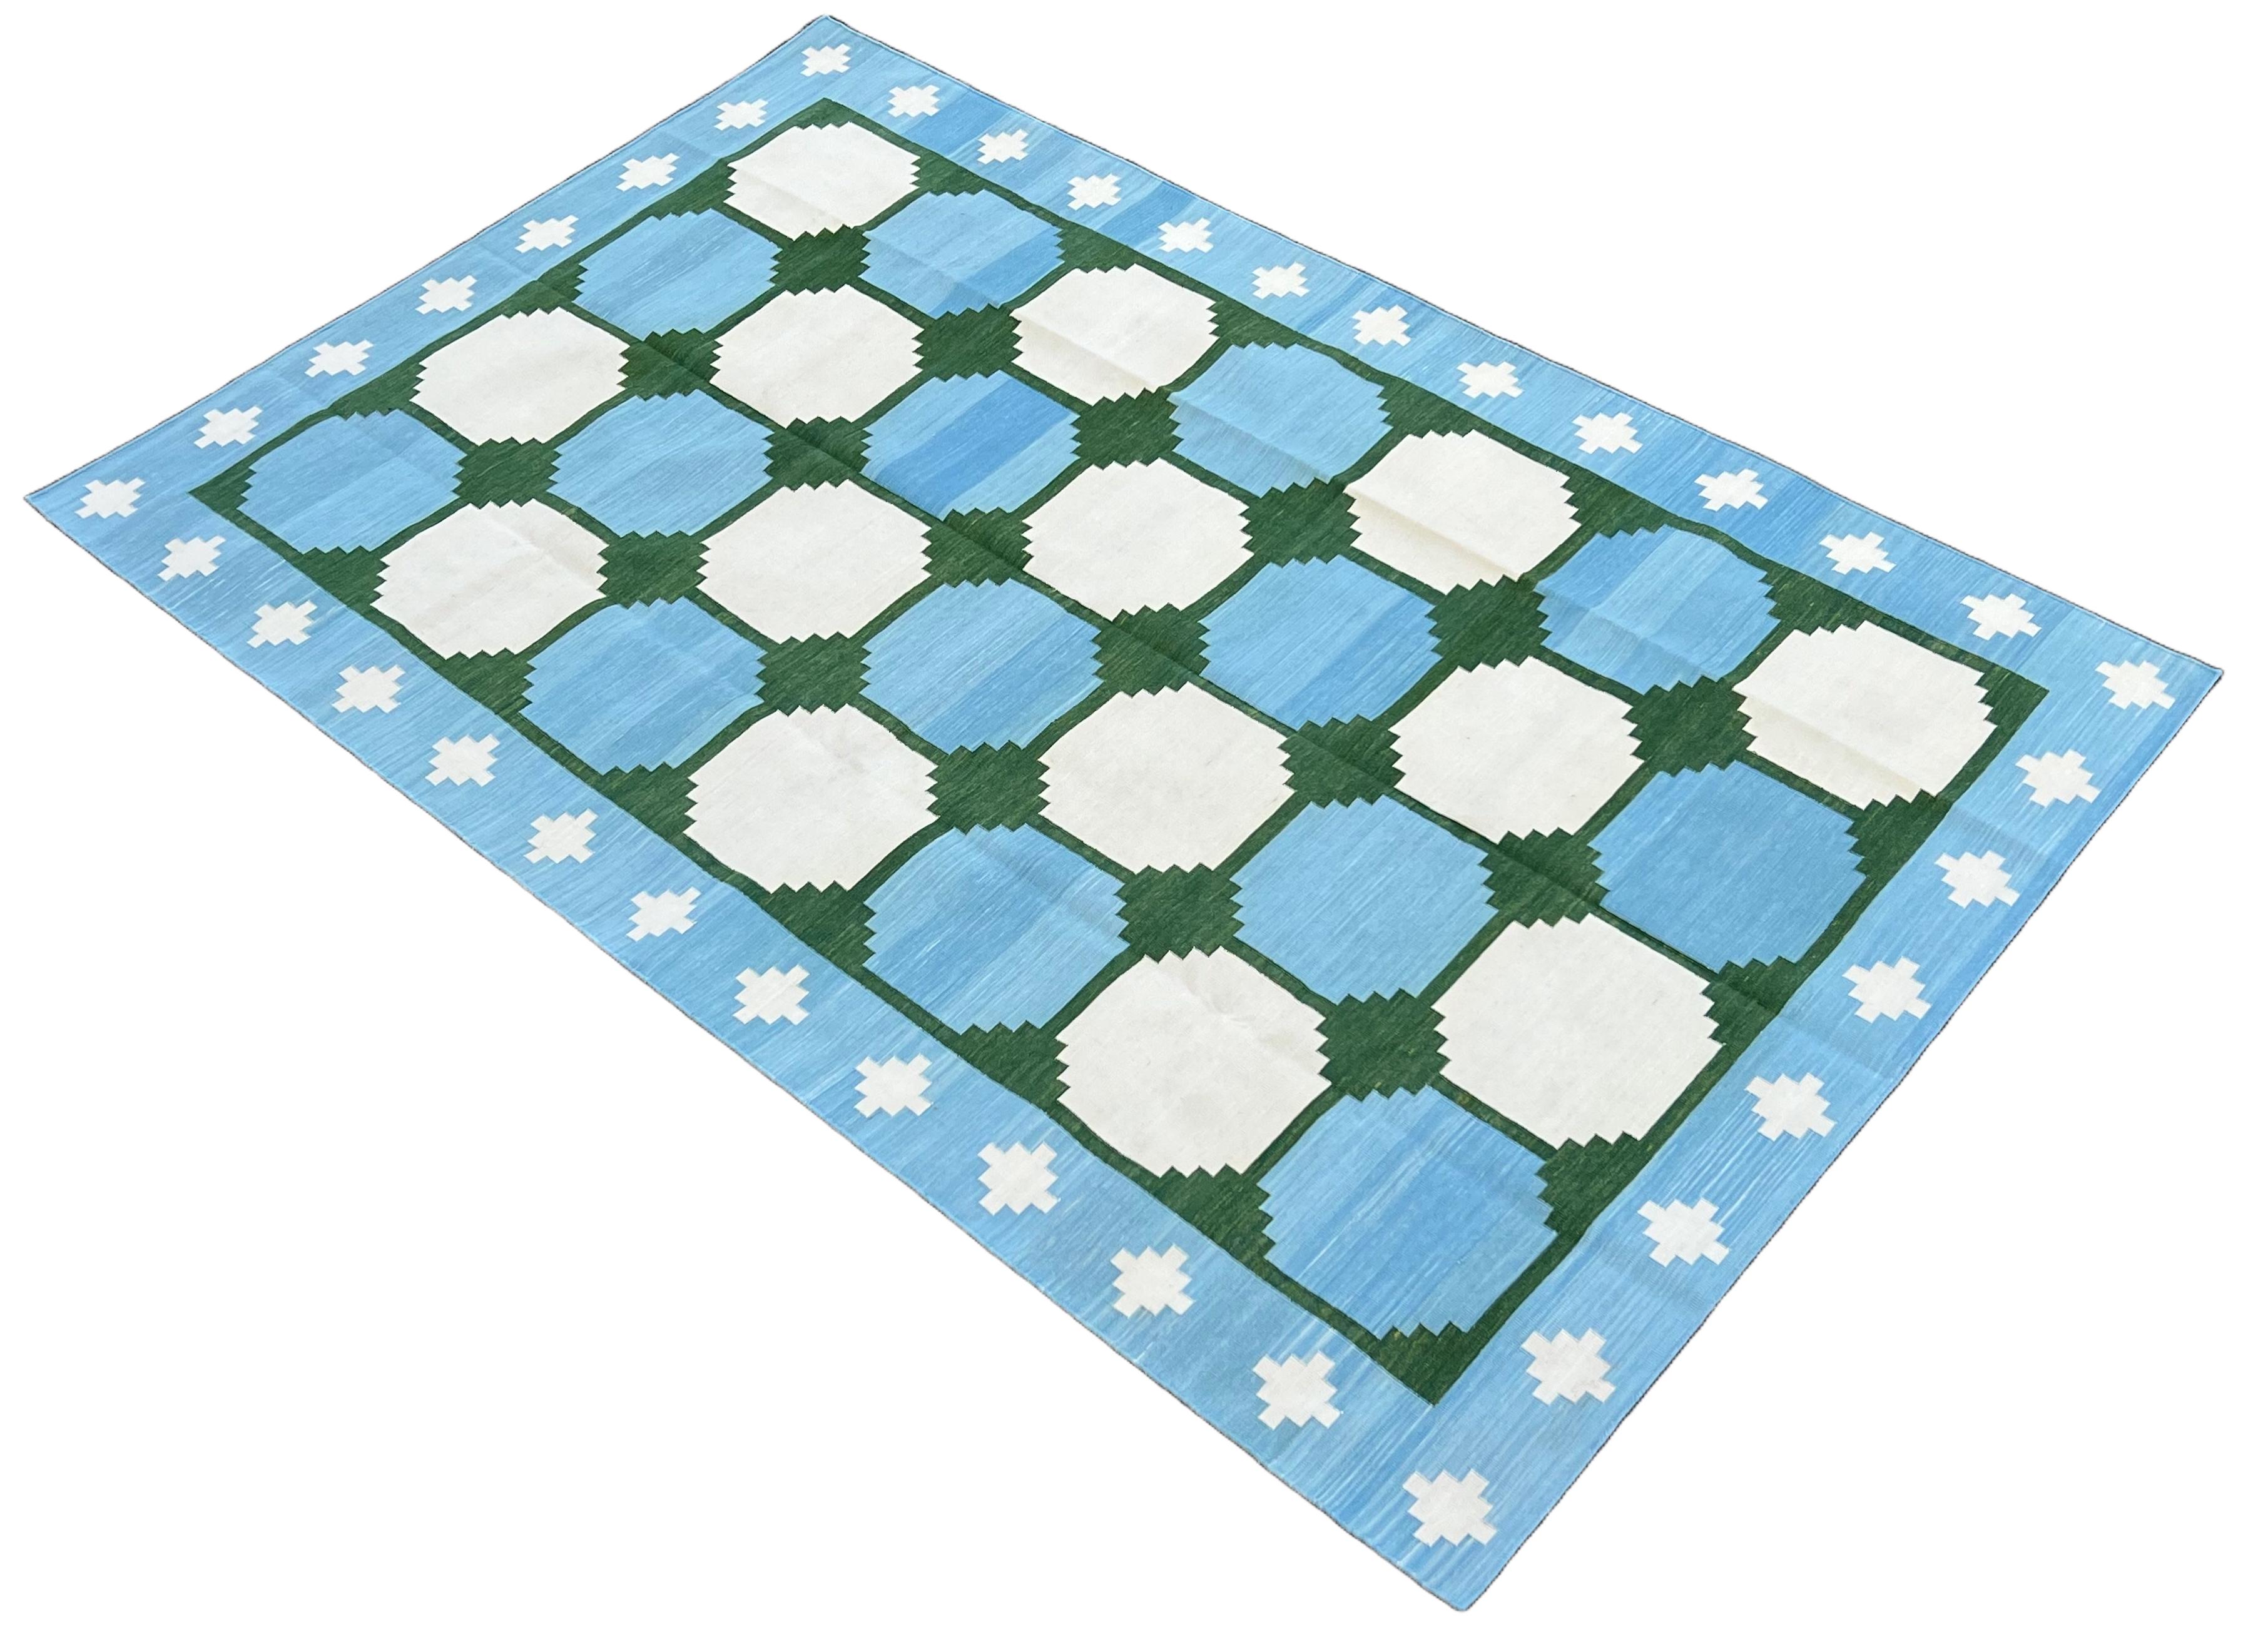 Cotton Vegetable Dyed Sky Blue, Green And Cream Tile Patterned Indian Dhurrie Rug-5'x8' 
These special flat-weave dhurries are hand-woven with 15 ply 100% cotton yarn. Due to the special manufacturing techniques used to create our rugs, the size and